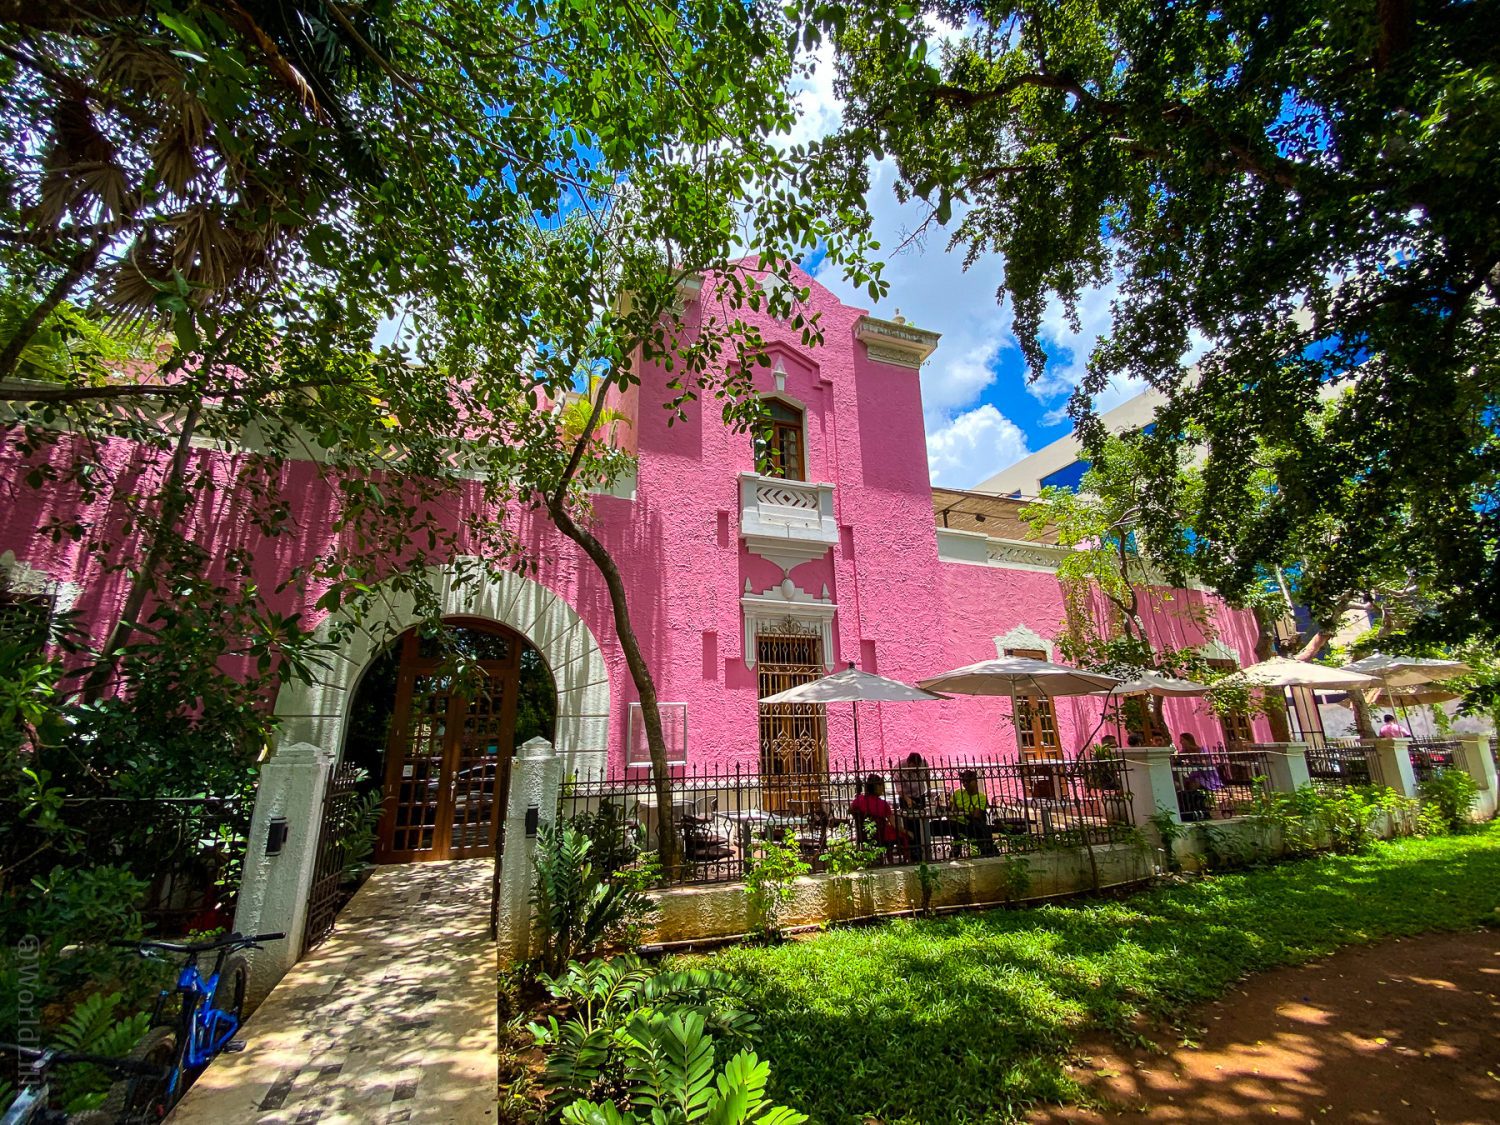 A bright pink building in Merida.